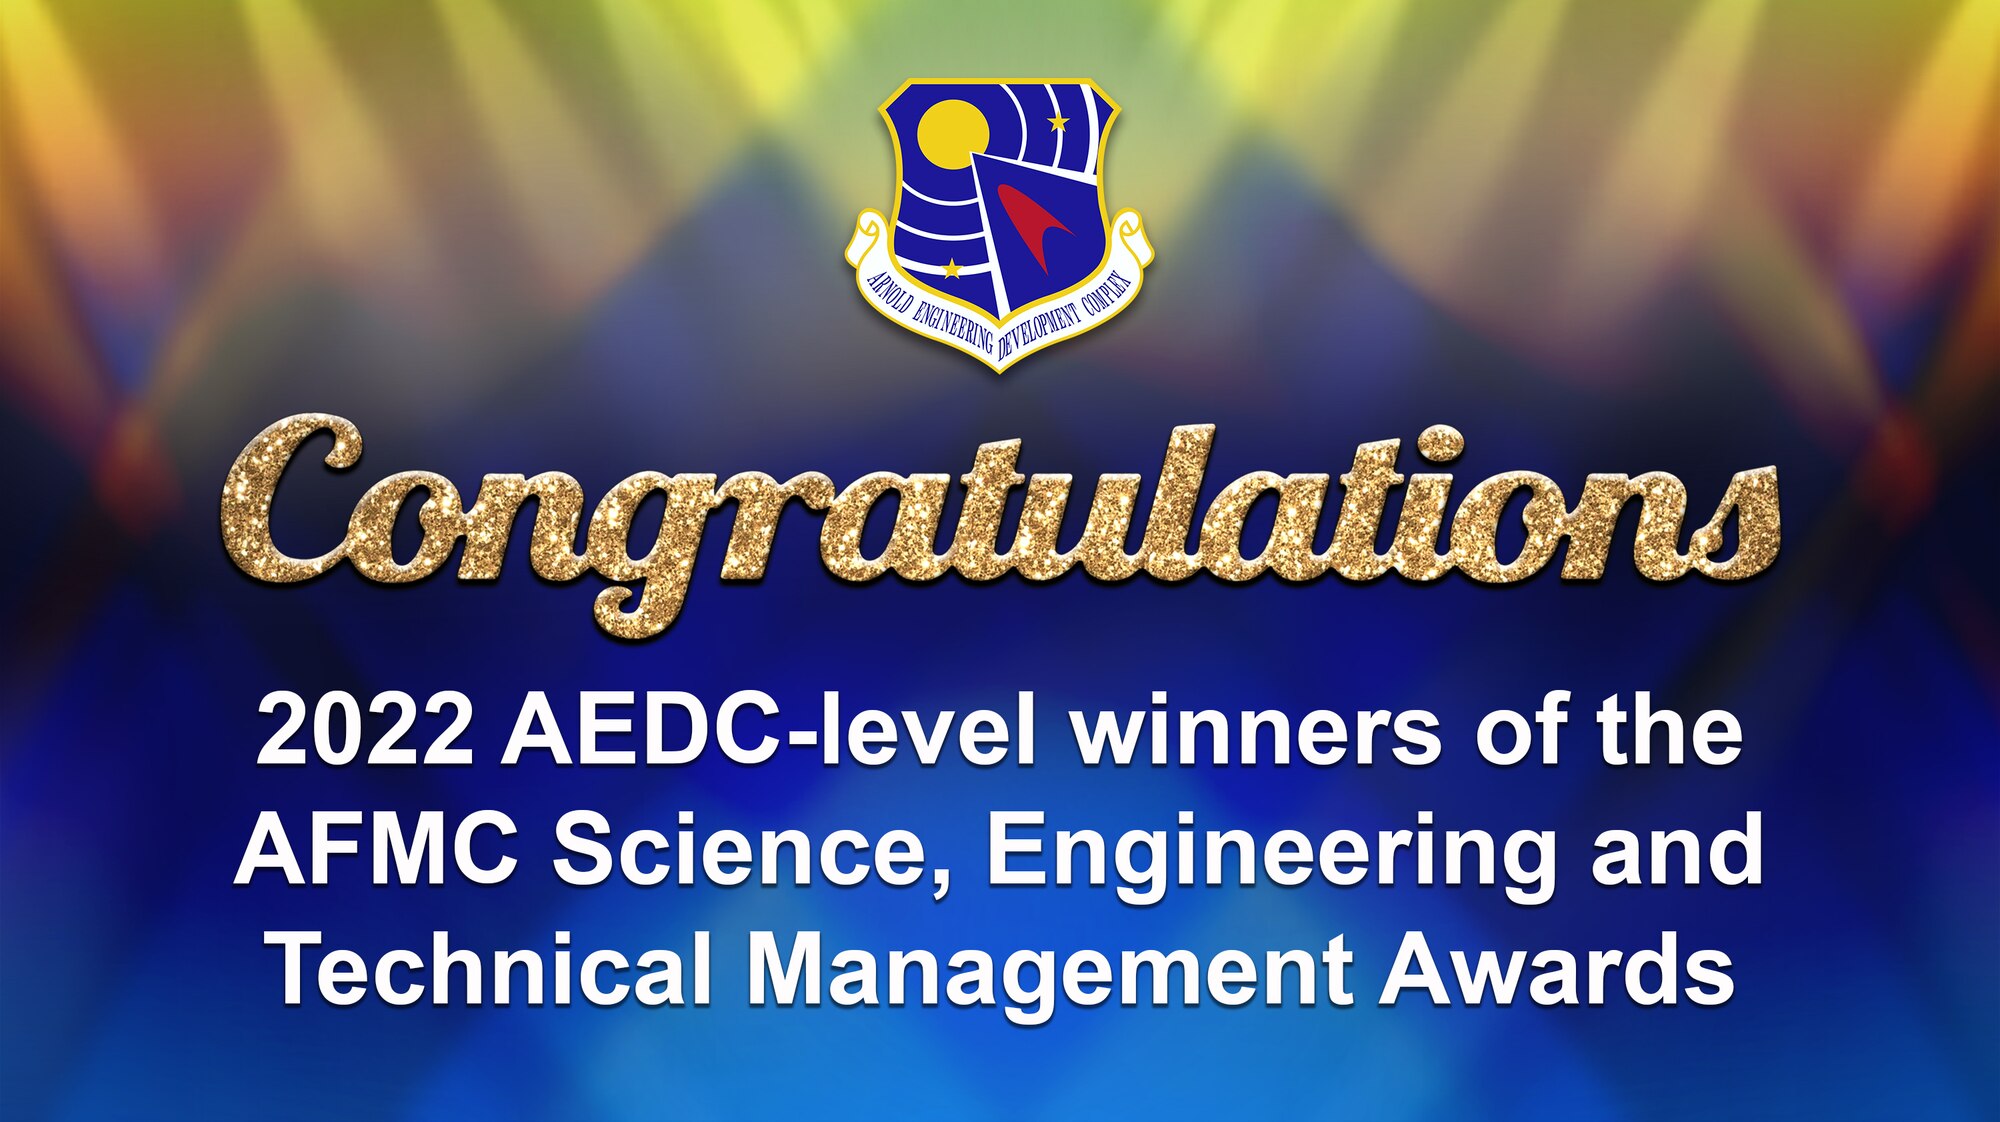 Graphic that says "Congratulations 2022 AEDC-level winners of the Science, Engineering and Technical Management Awards"